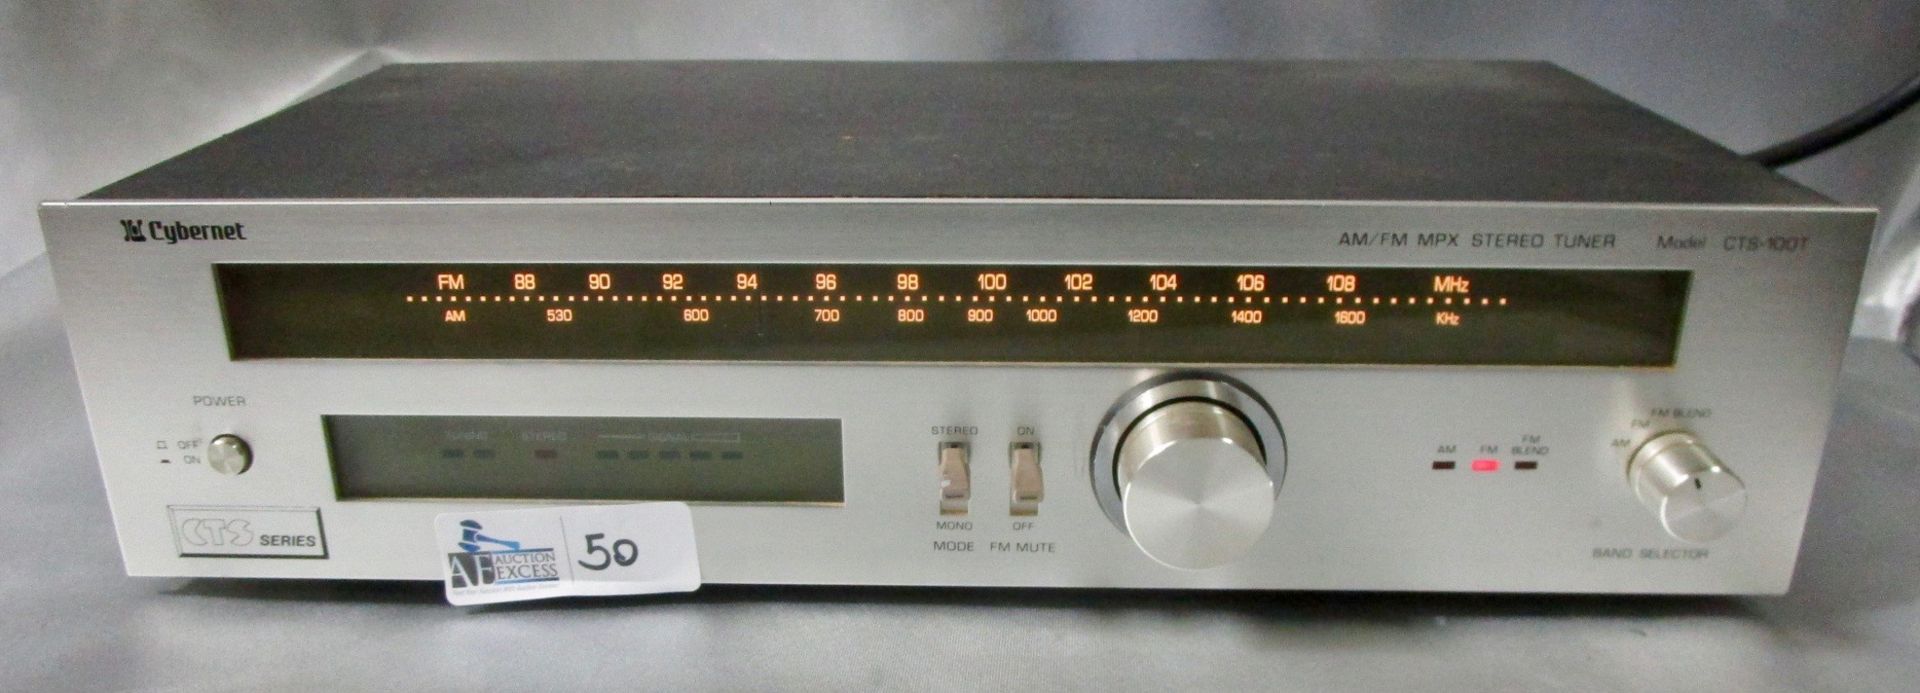 CYBERNET CTS-100T AM/FM MPX STEREO TUNER